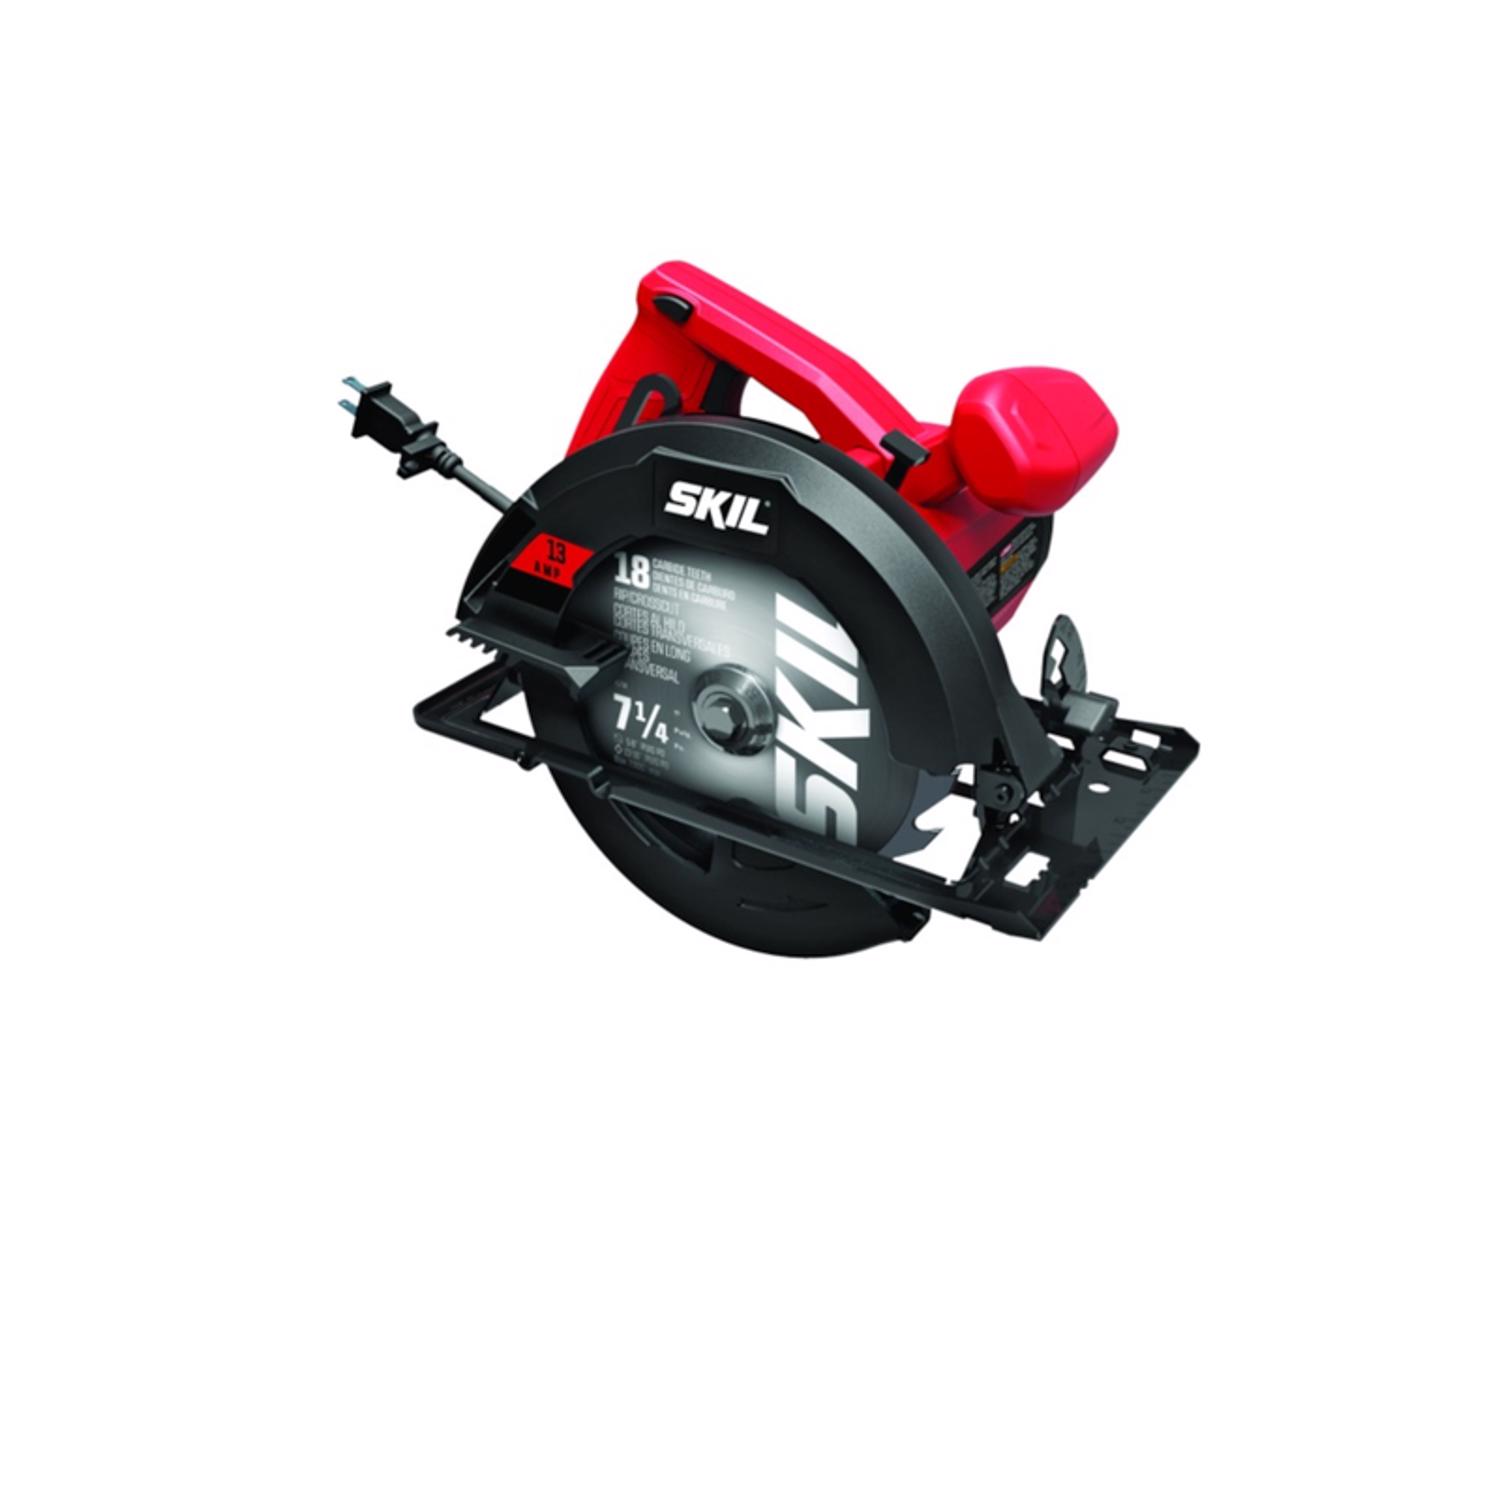 Photos - Power Saw Skil 13 amps 7-1/4 in. Corded Brushed Circular Saw 5080-01 